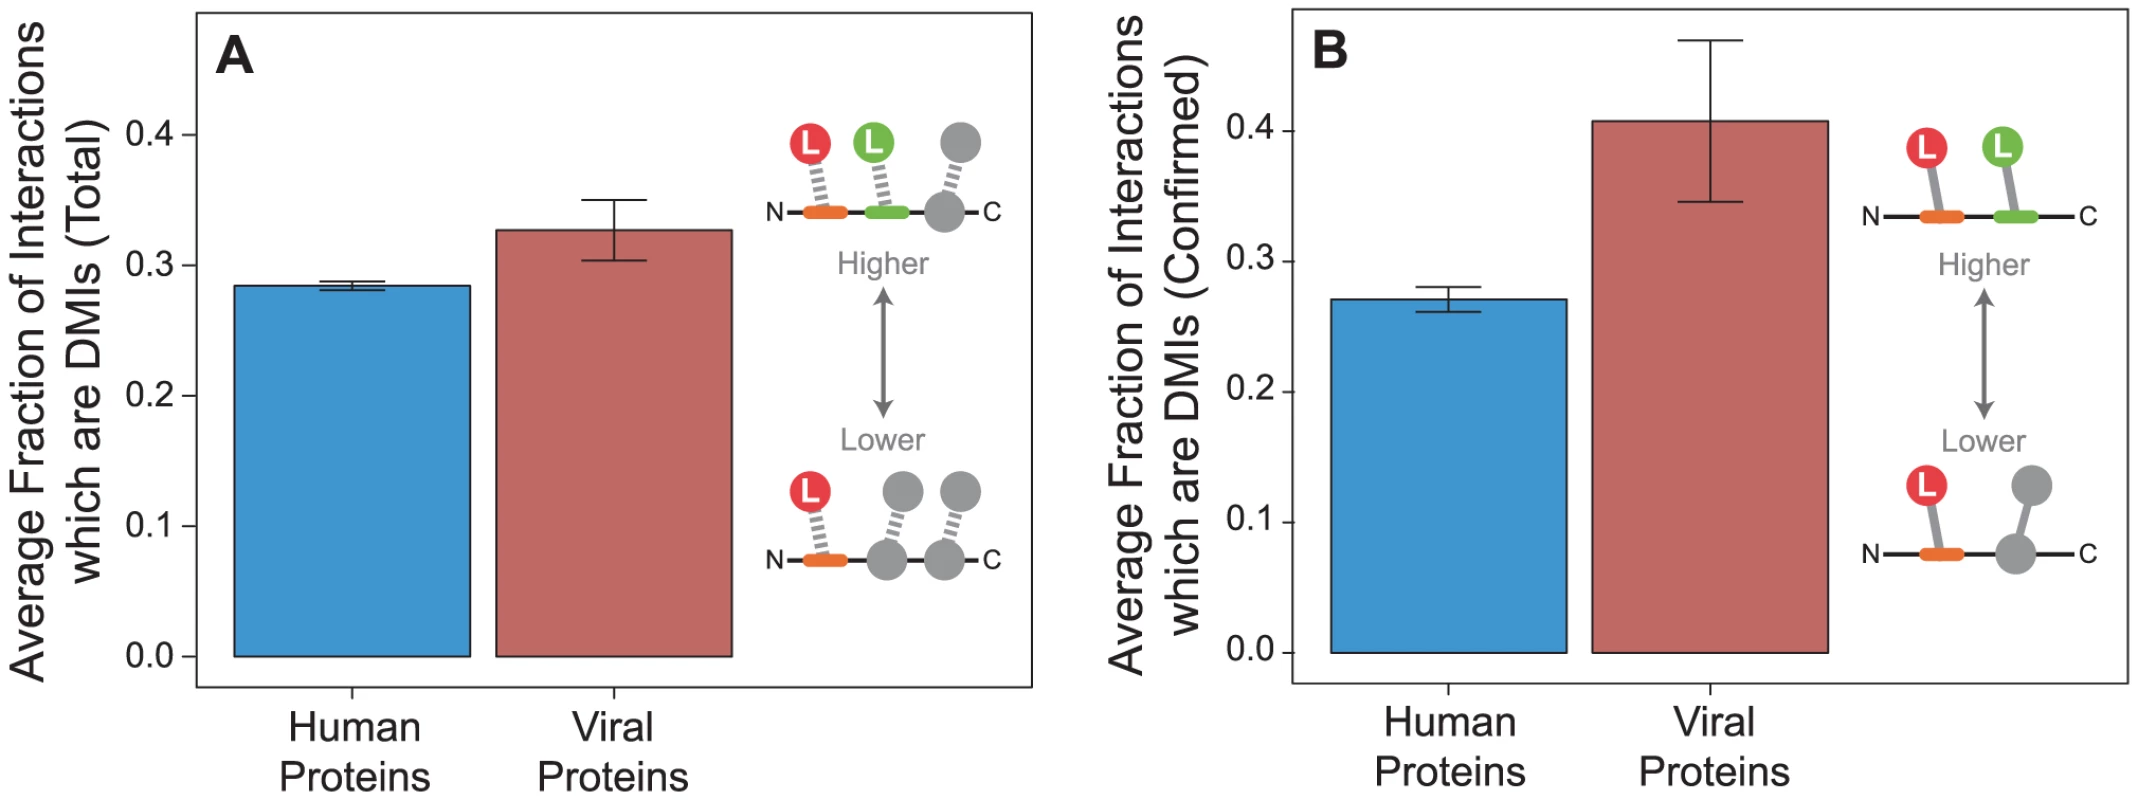 Viral proteins have a higher fraction of domain-motif interactions (DMIs) than human proteins.